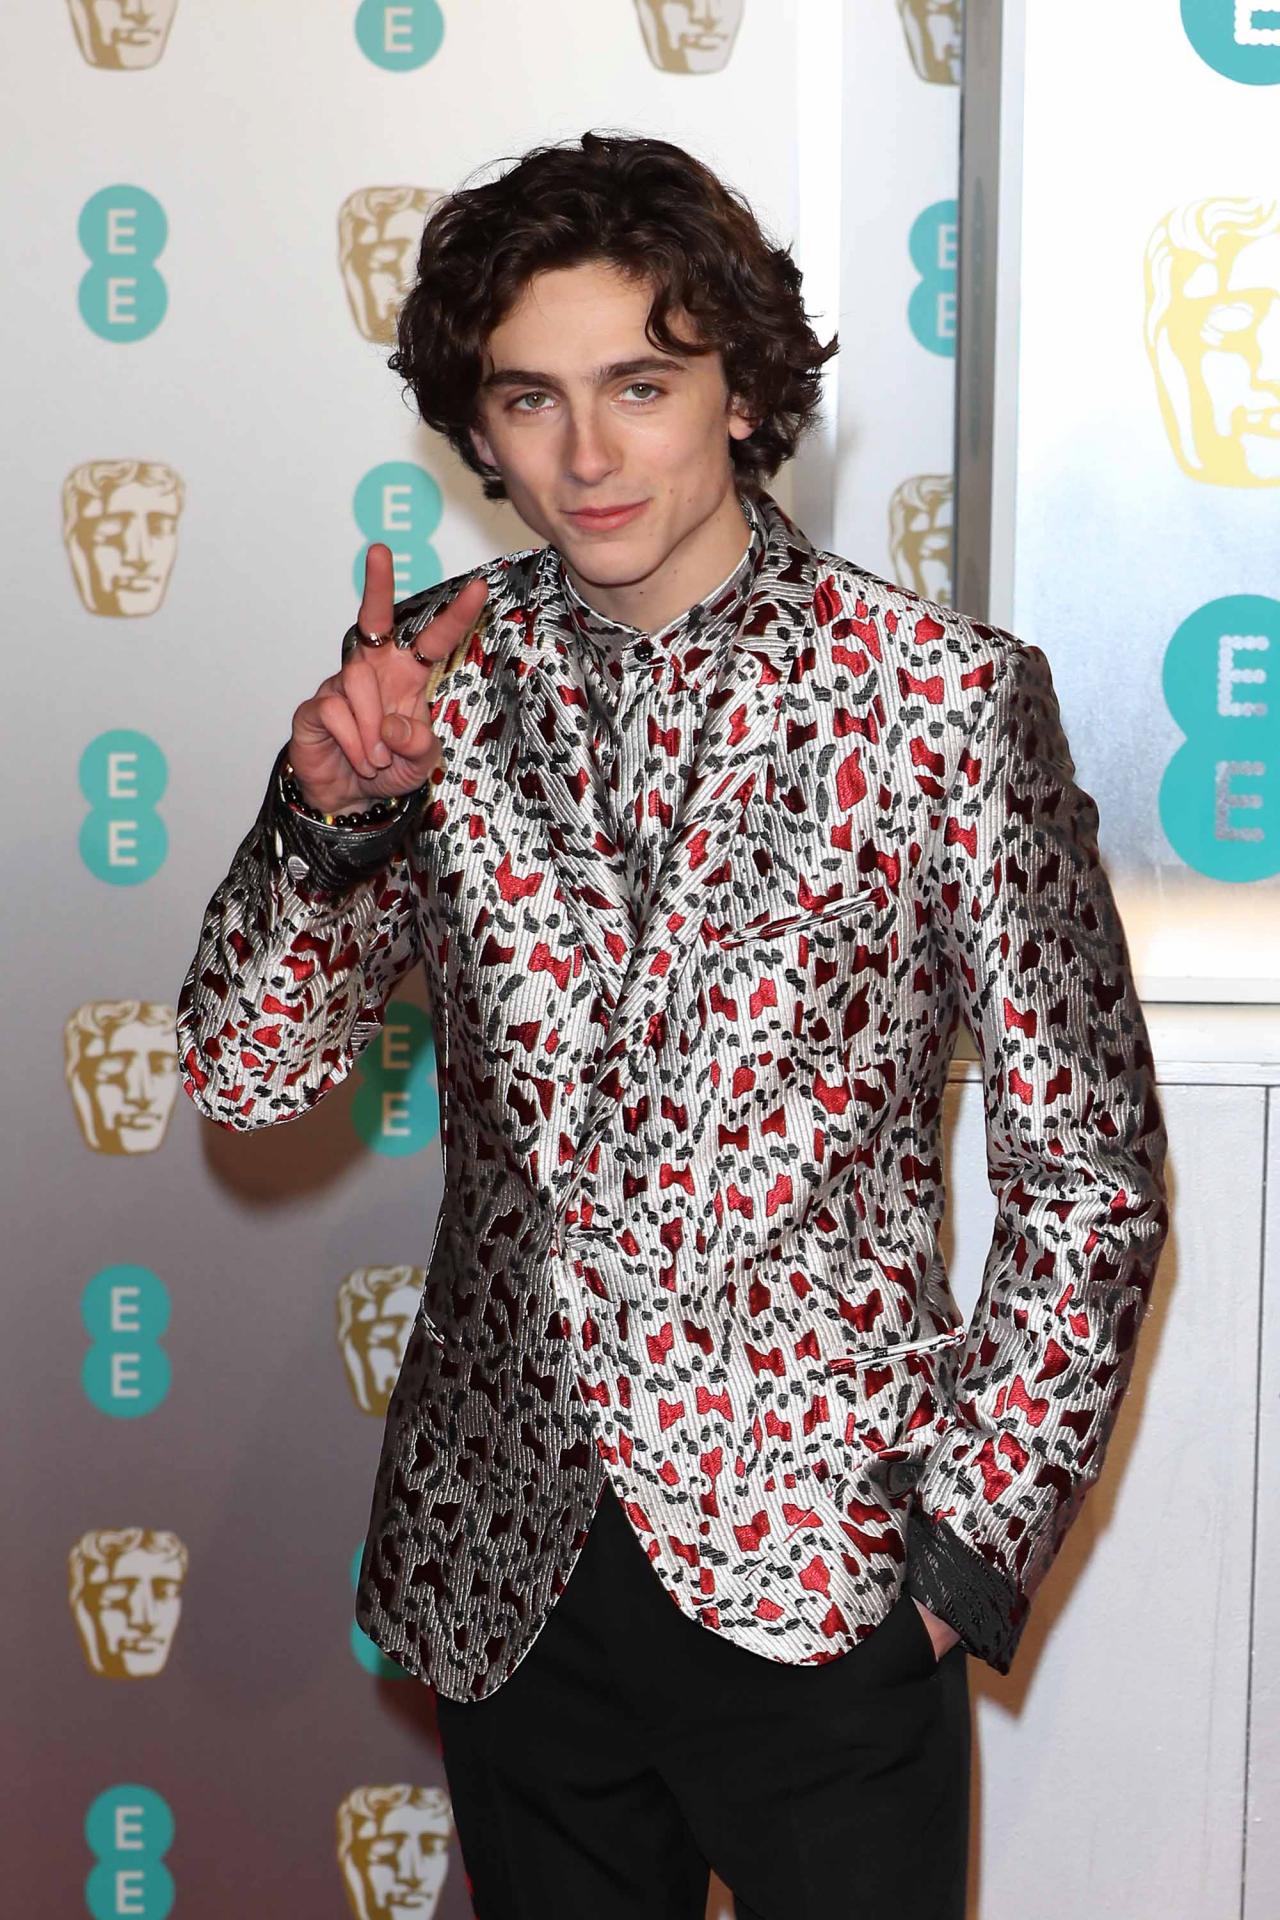 LONDON, ENGLAND - FEBRUARY 10: Timothee Chalamet attends the EE British Academy Film Awards at Royal Albert Hall on February 10, 2019 in London, England. (Photo by Neil Mockford/FilmMagic)